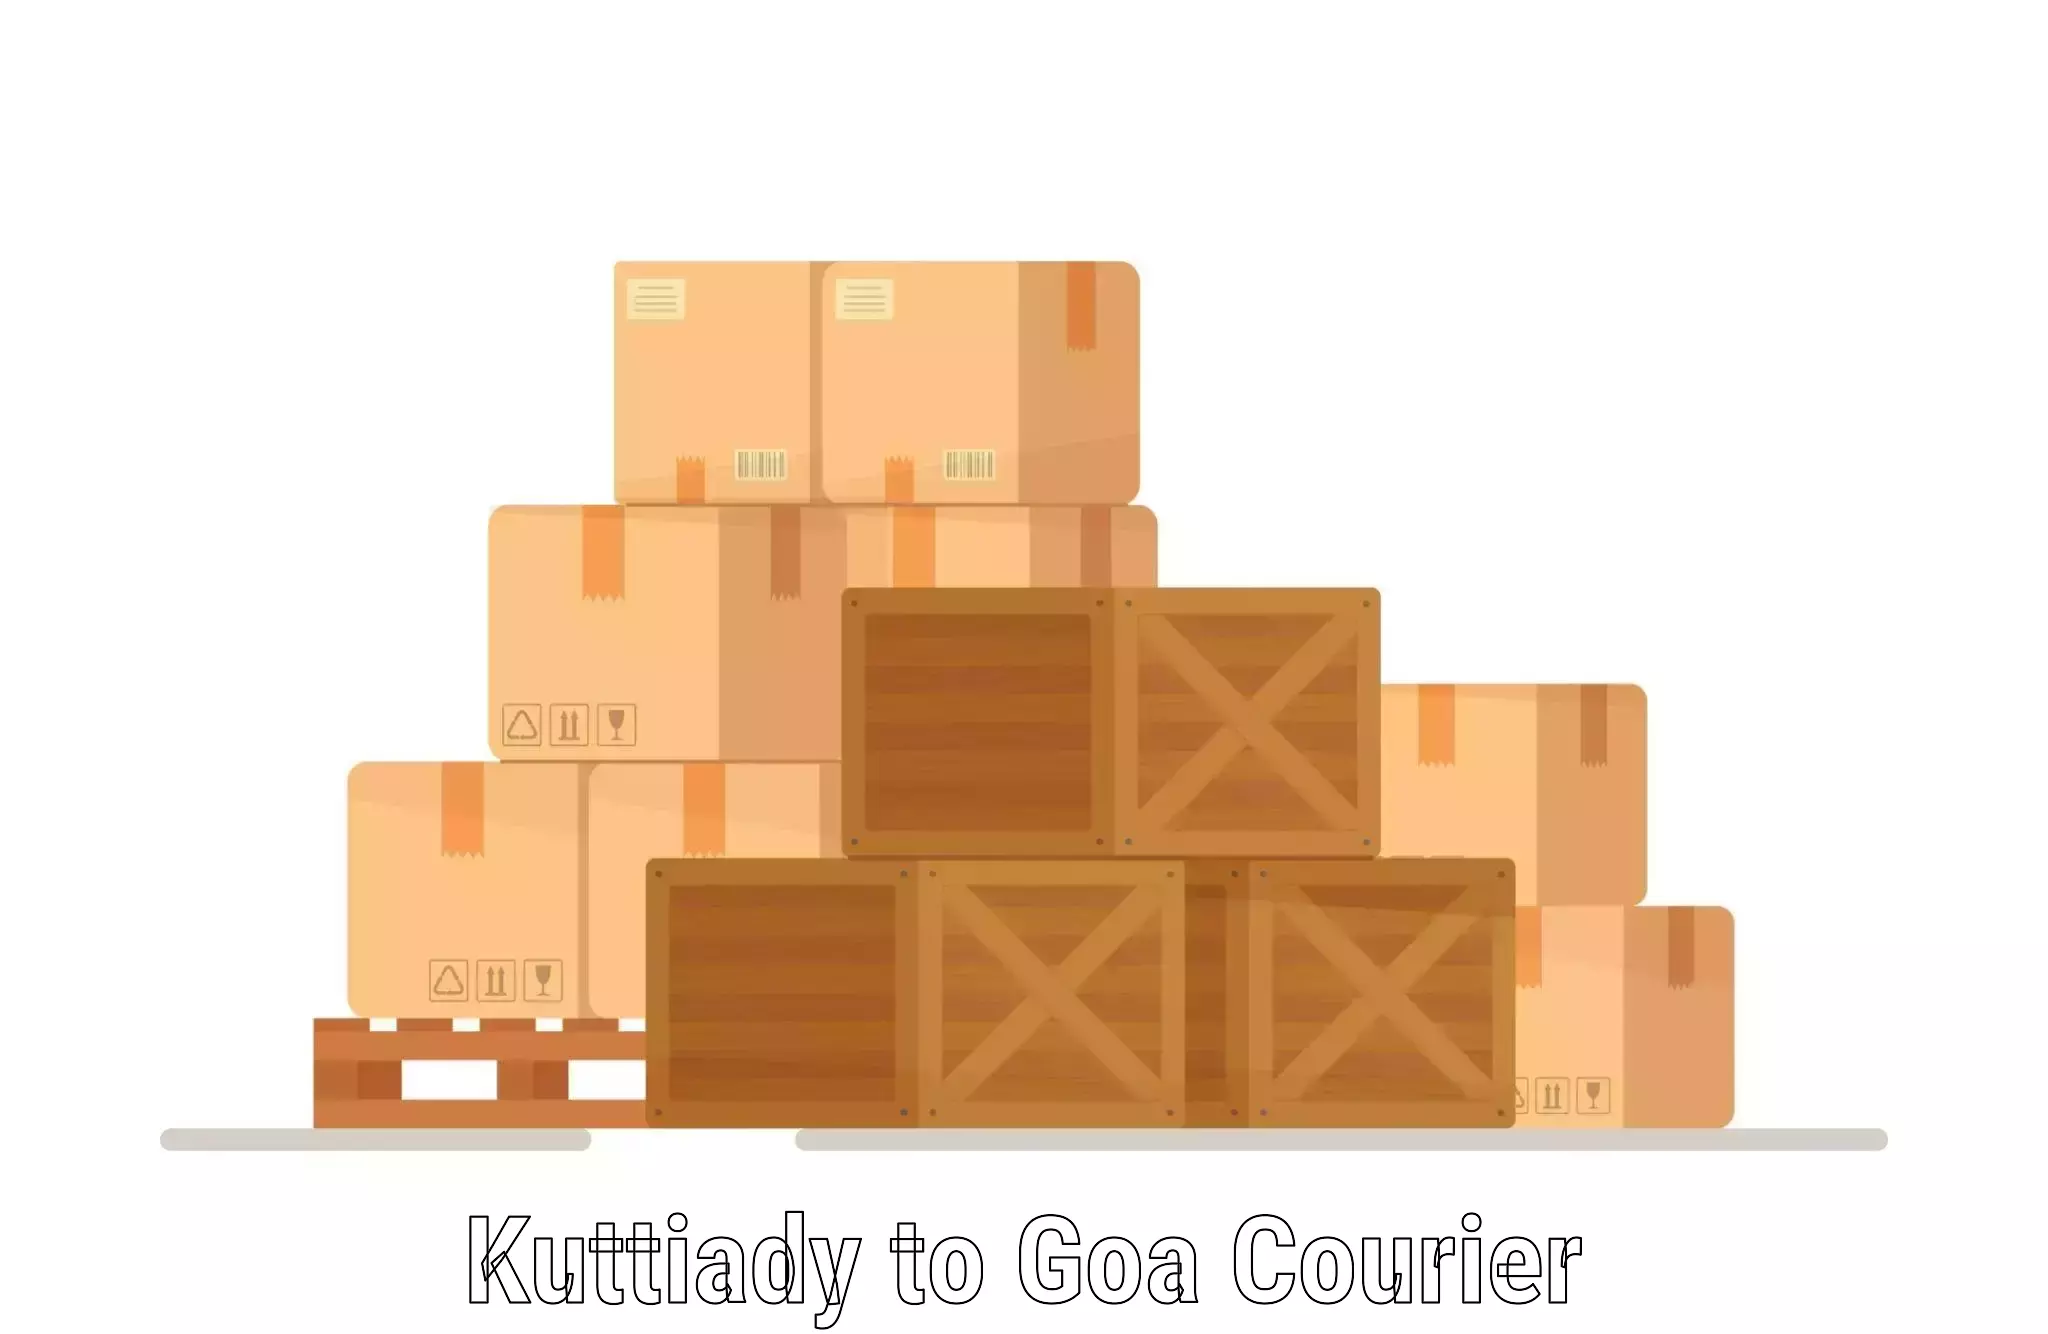 State-of-the-art courier technology Kuttiady to Goa